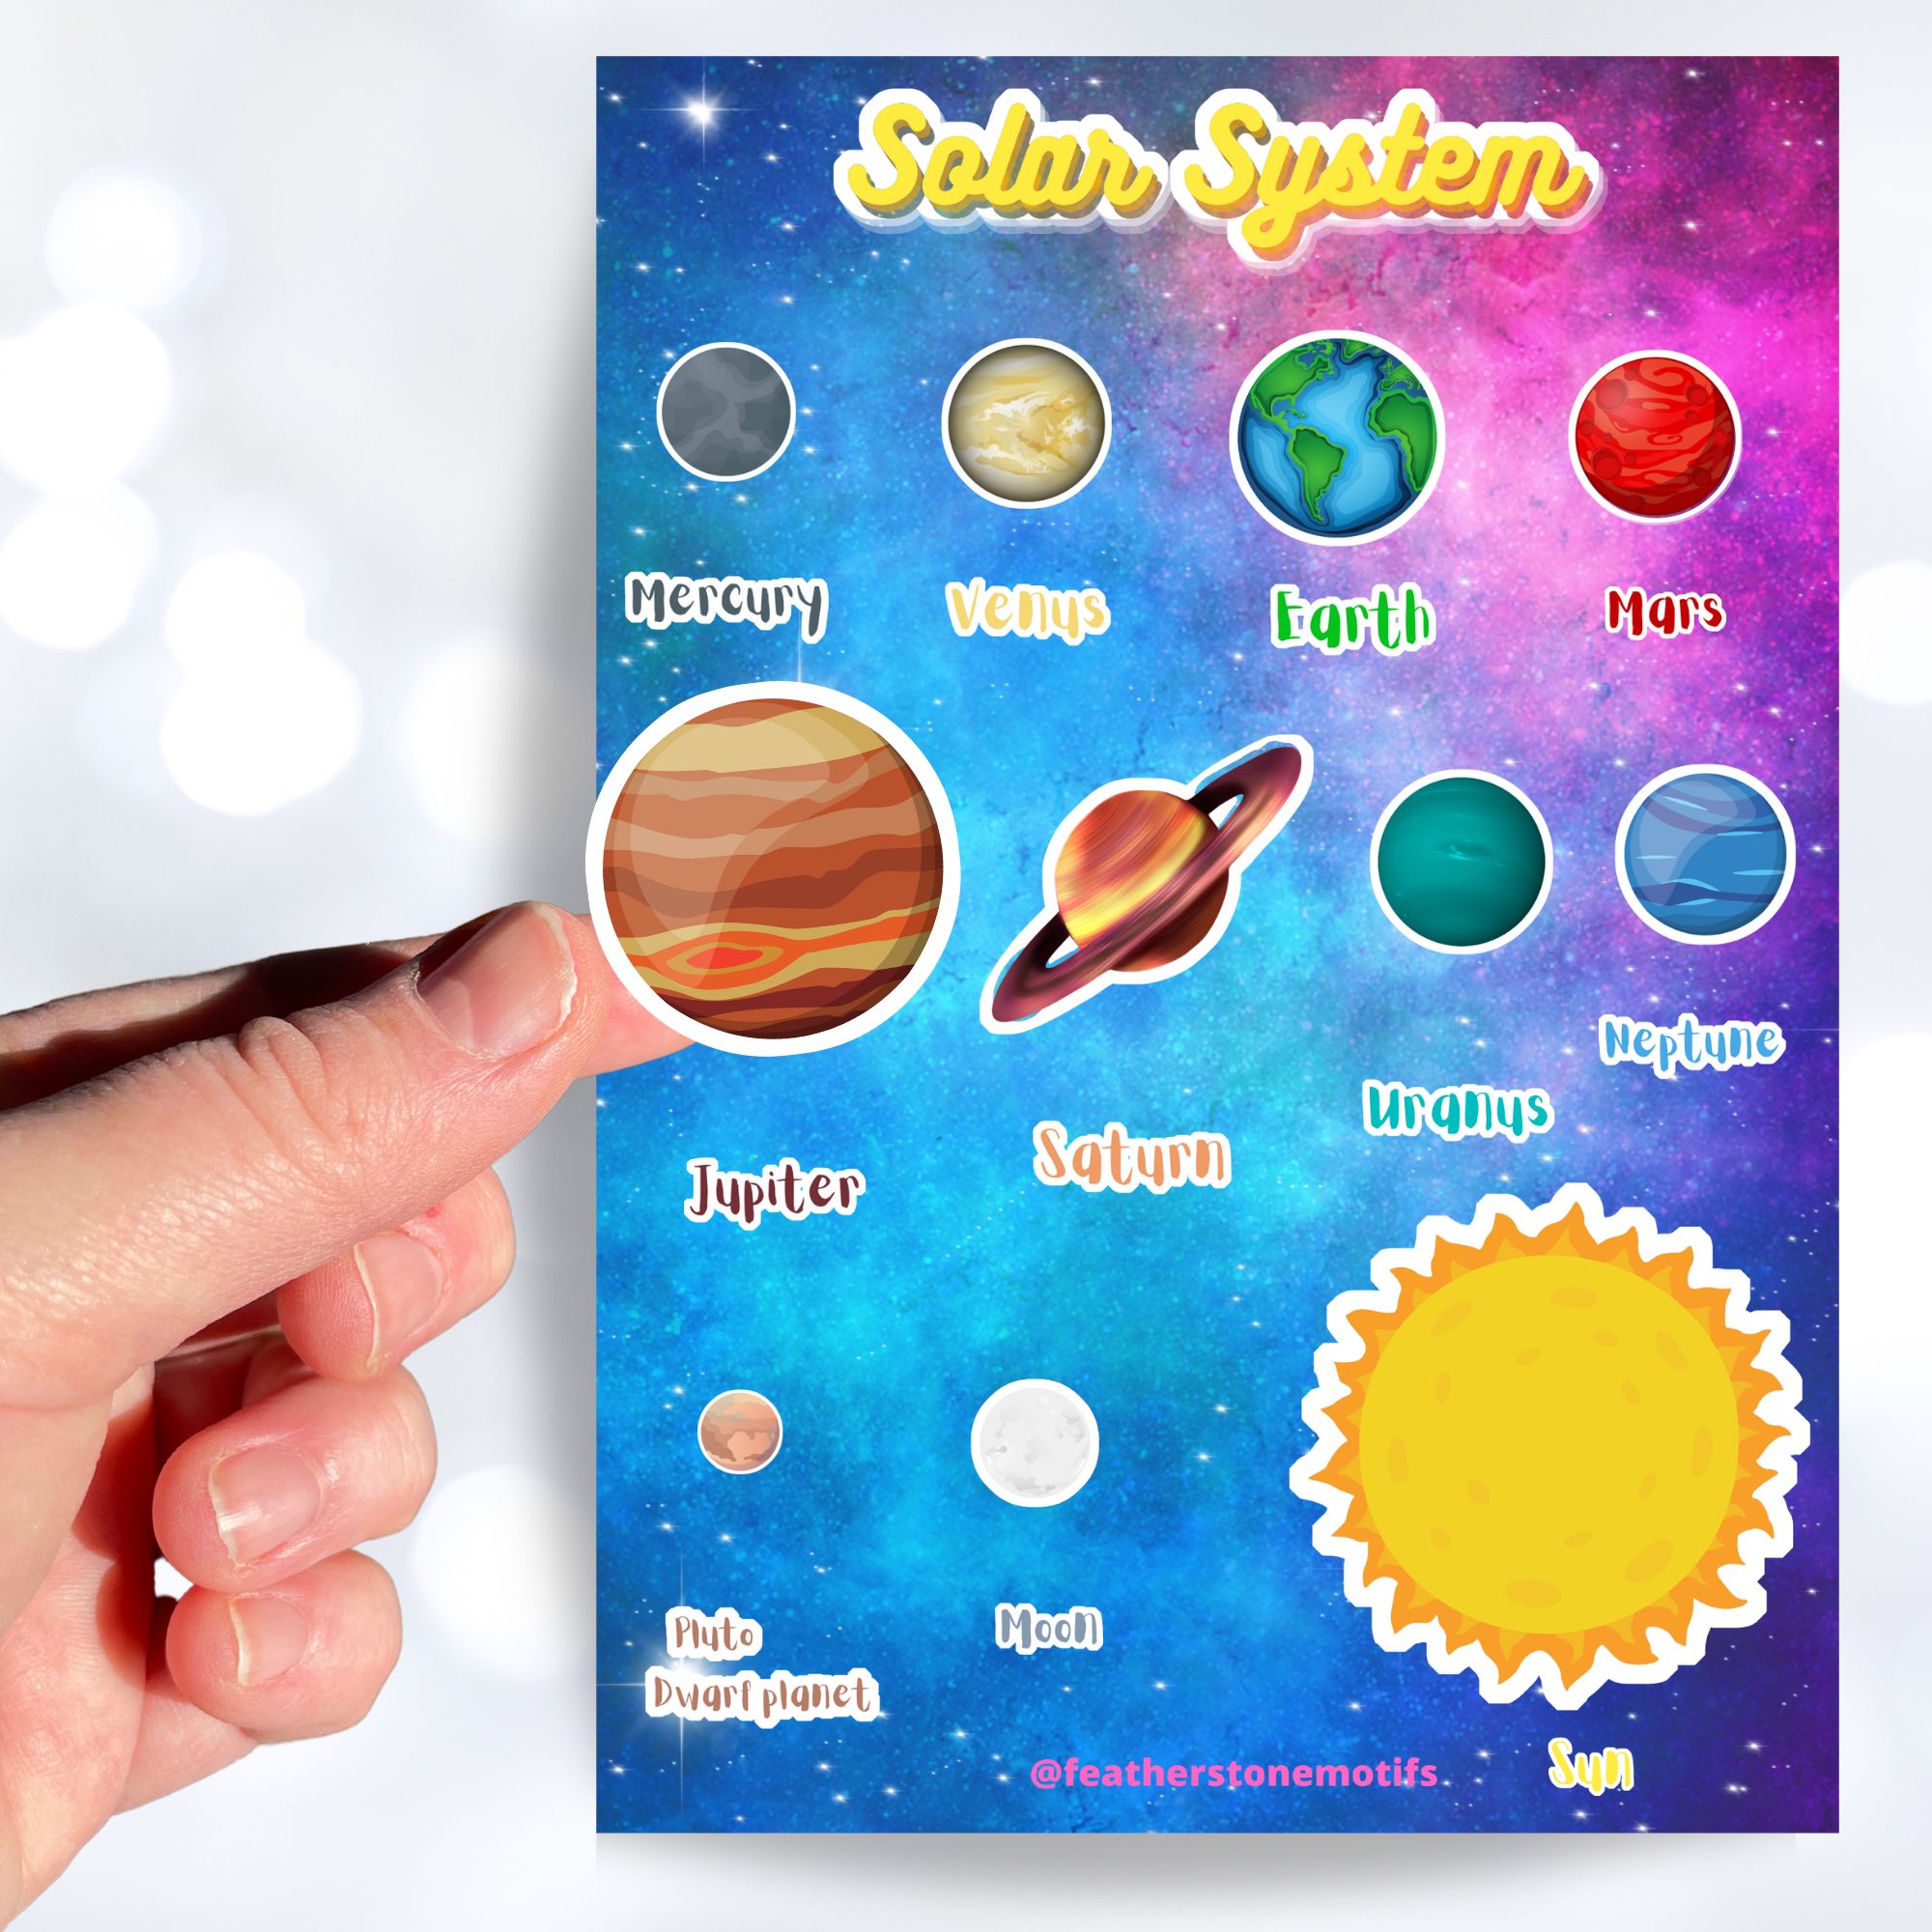 Our solar system - 8 (or 9) planets plus the sun and moon. This sticker sheet is great for class projects or for any aspiring space scientists! Stickers of every planet's image as well as the planet's name - Mercury, Venus, Earth, Mars, Jupiter, Saturn, Uranus, Neptune, and Pluto. This image shows a hand holding a sticker image of Jupiter above the sticker sheet.